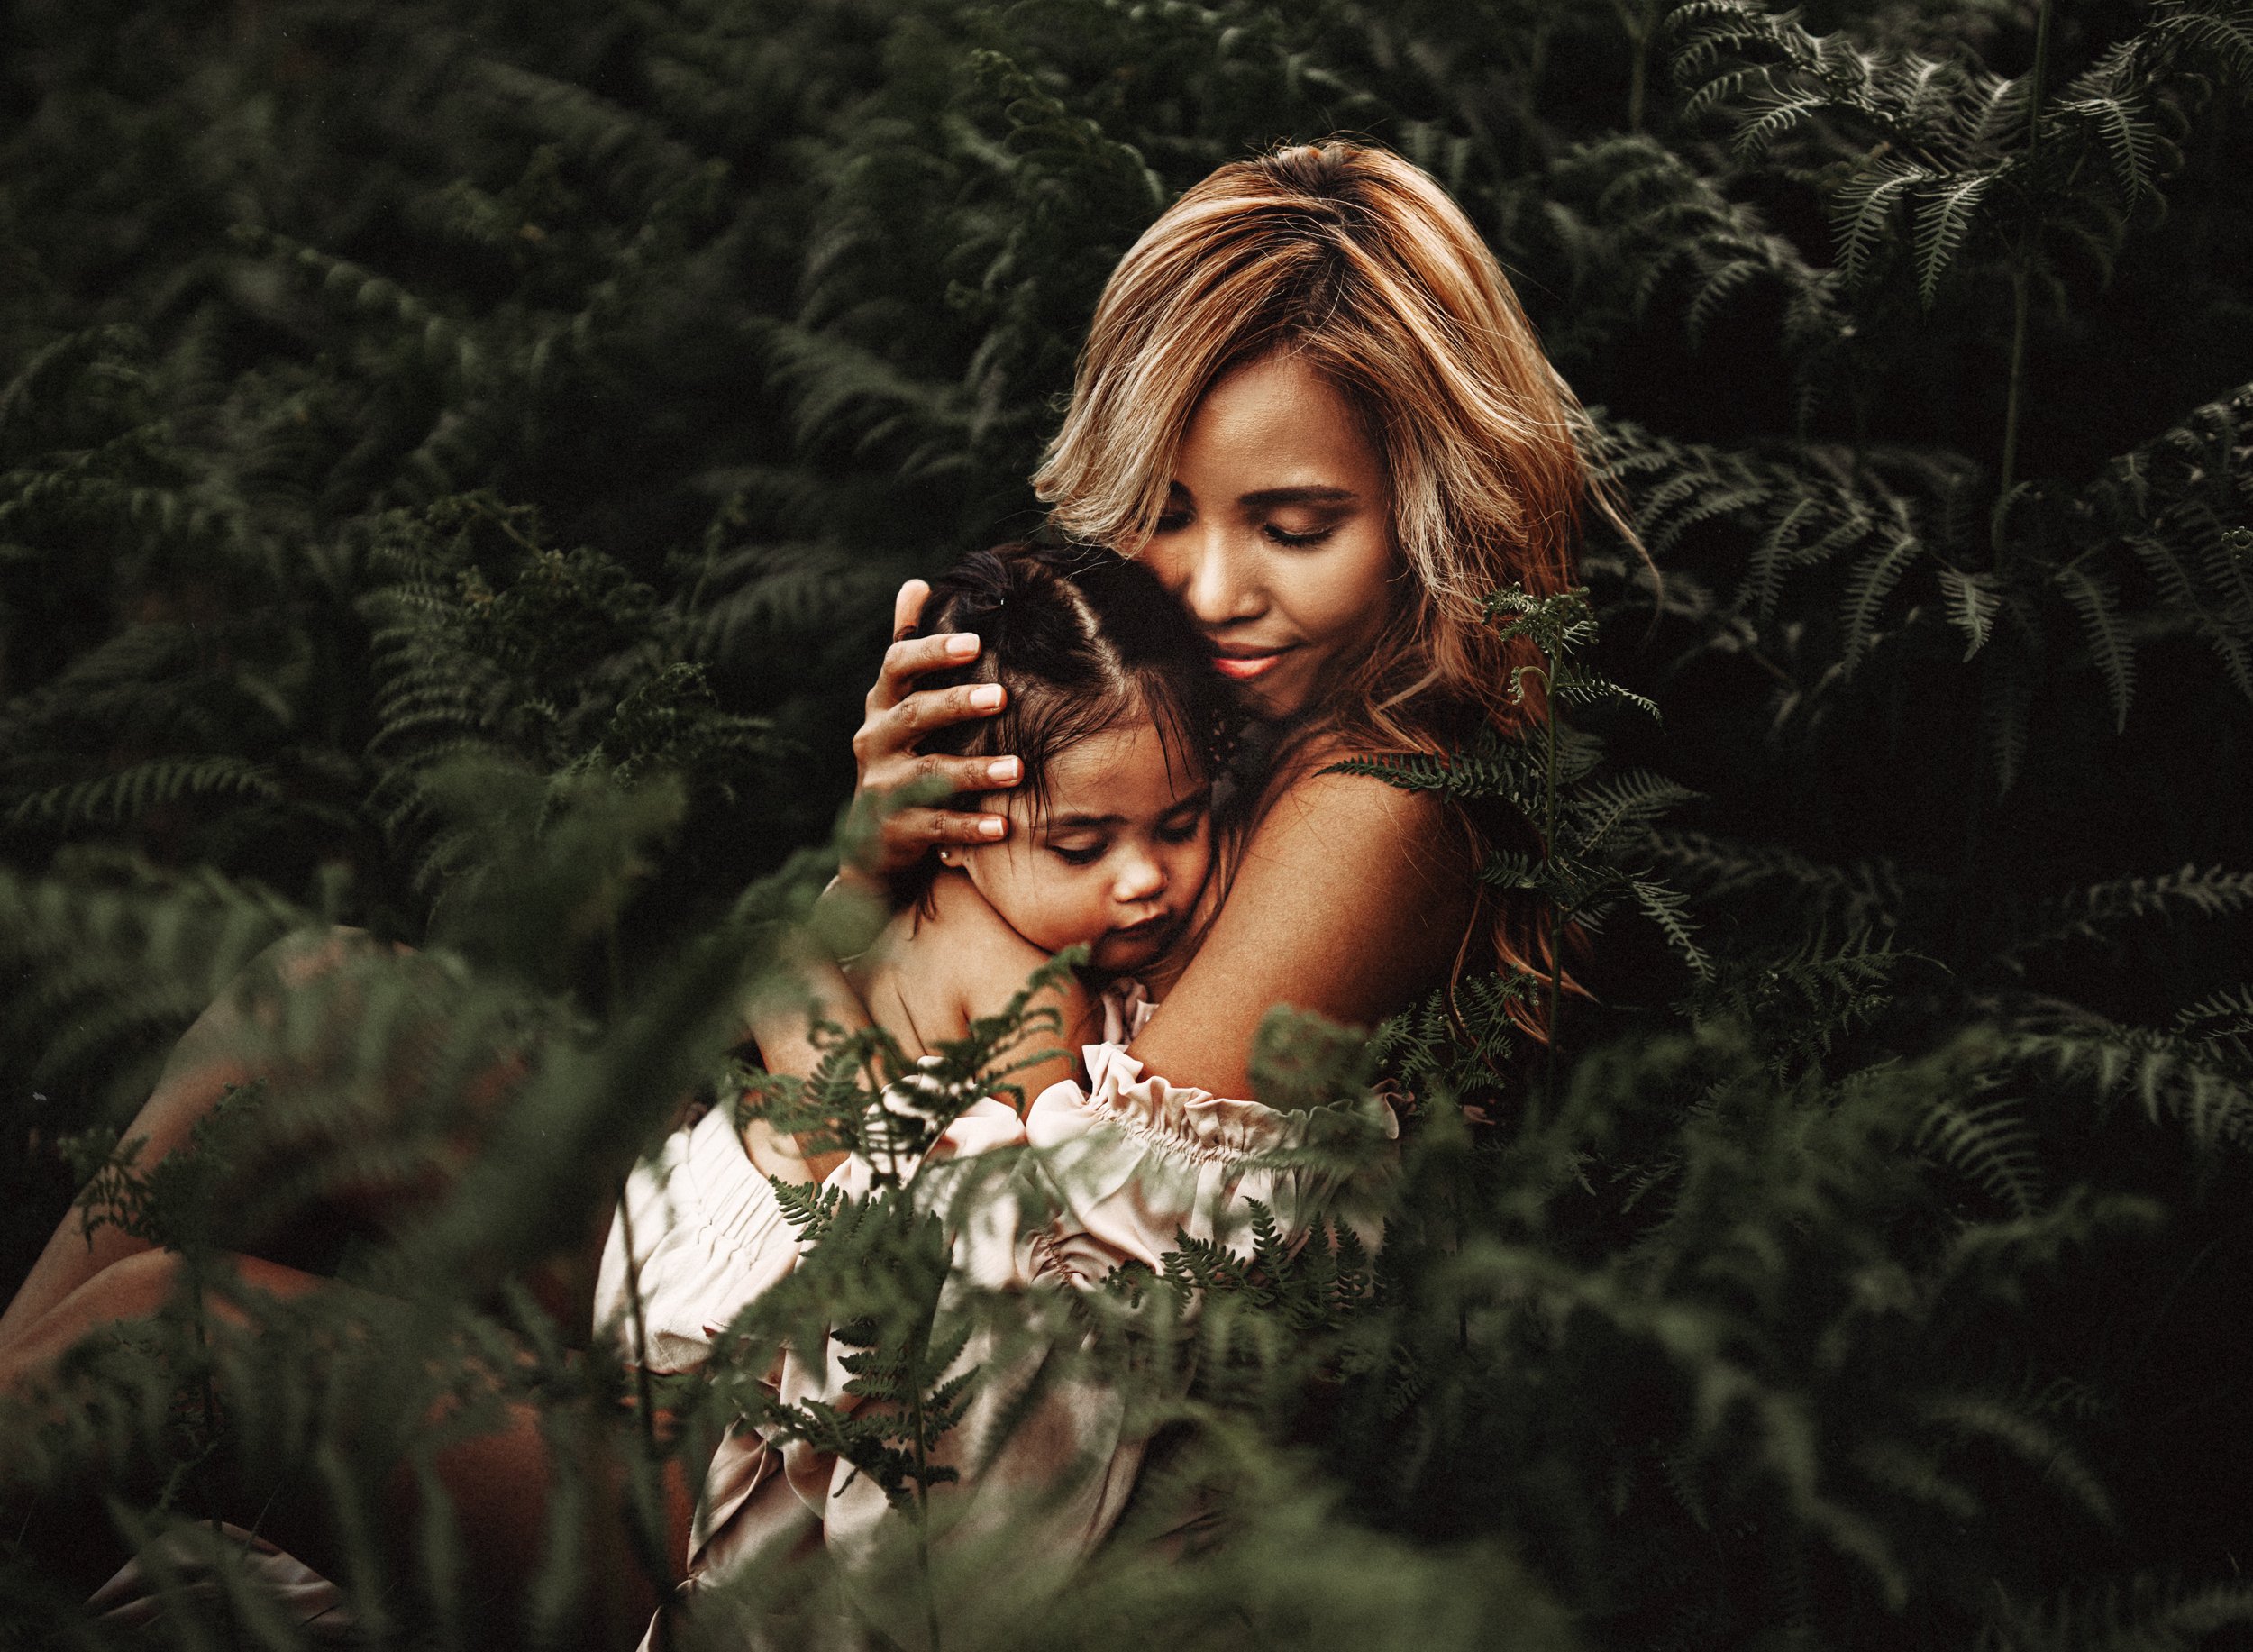 emotive-motherhood-photo-session-with-mother-and-daughter-in-a-patch-of-ferns-at-sunset-in-landtuhl-kmc-germany (9).jpg